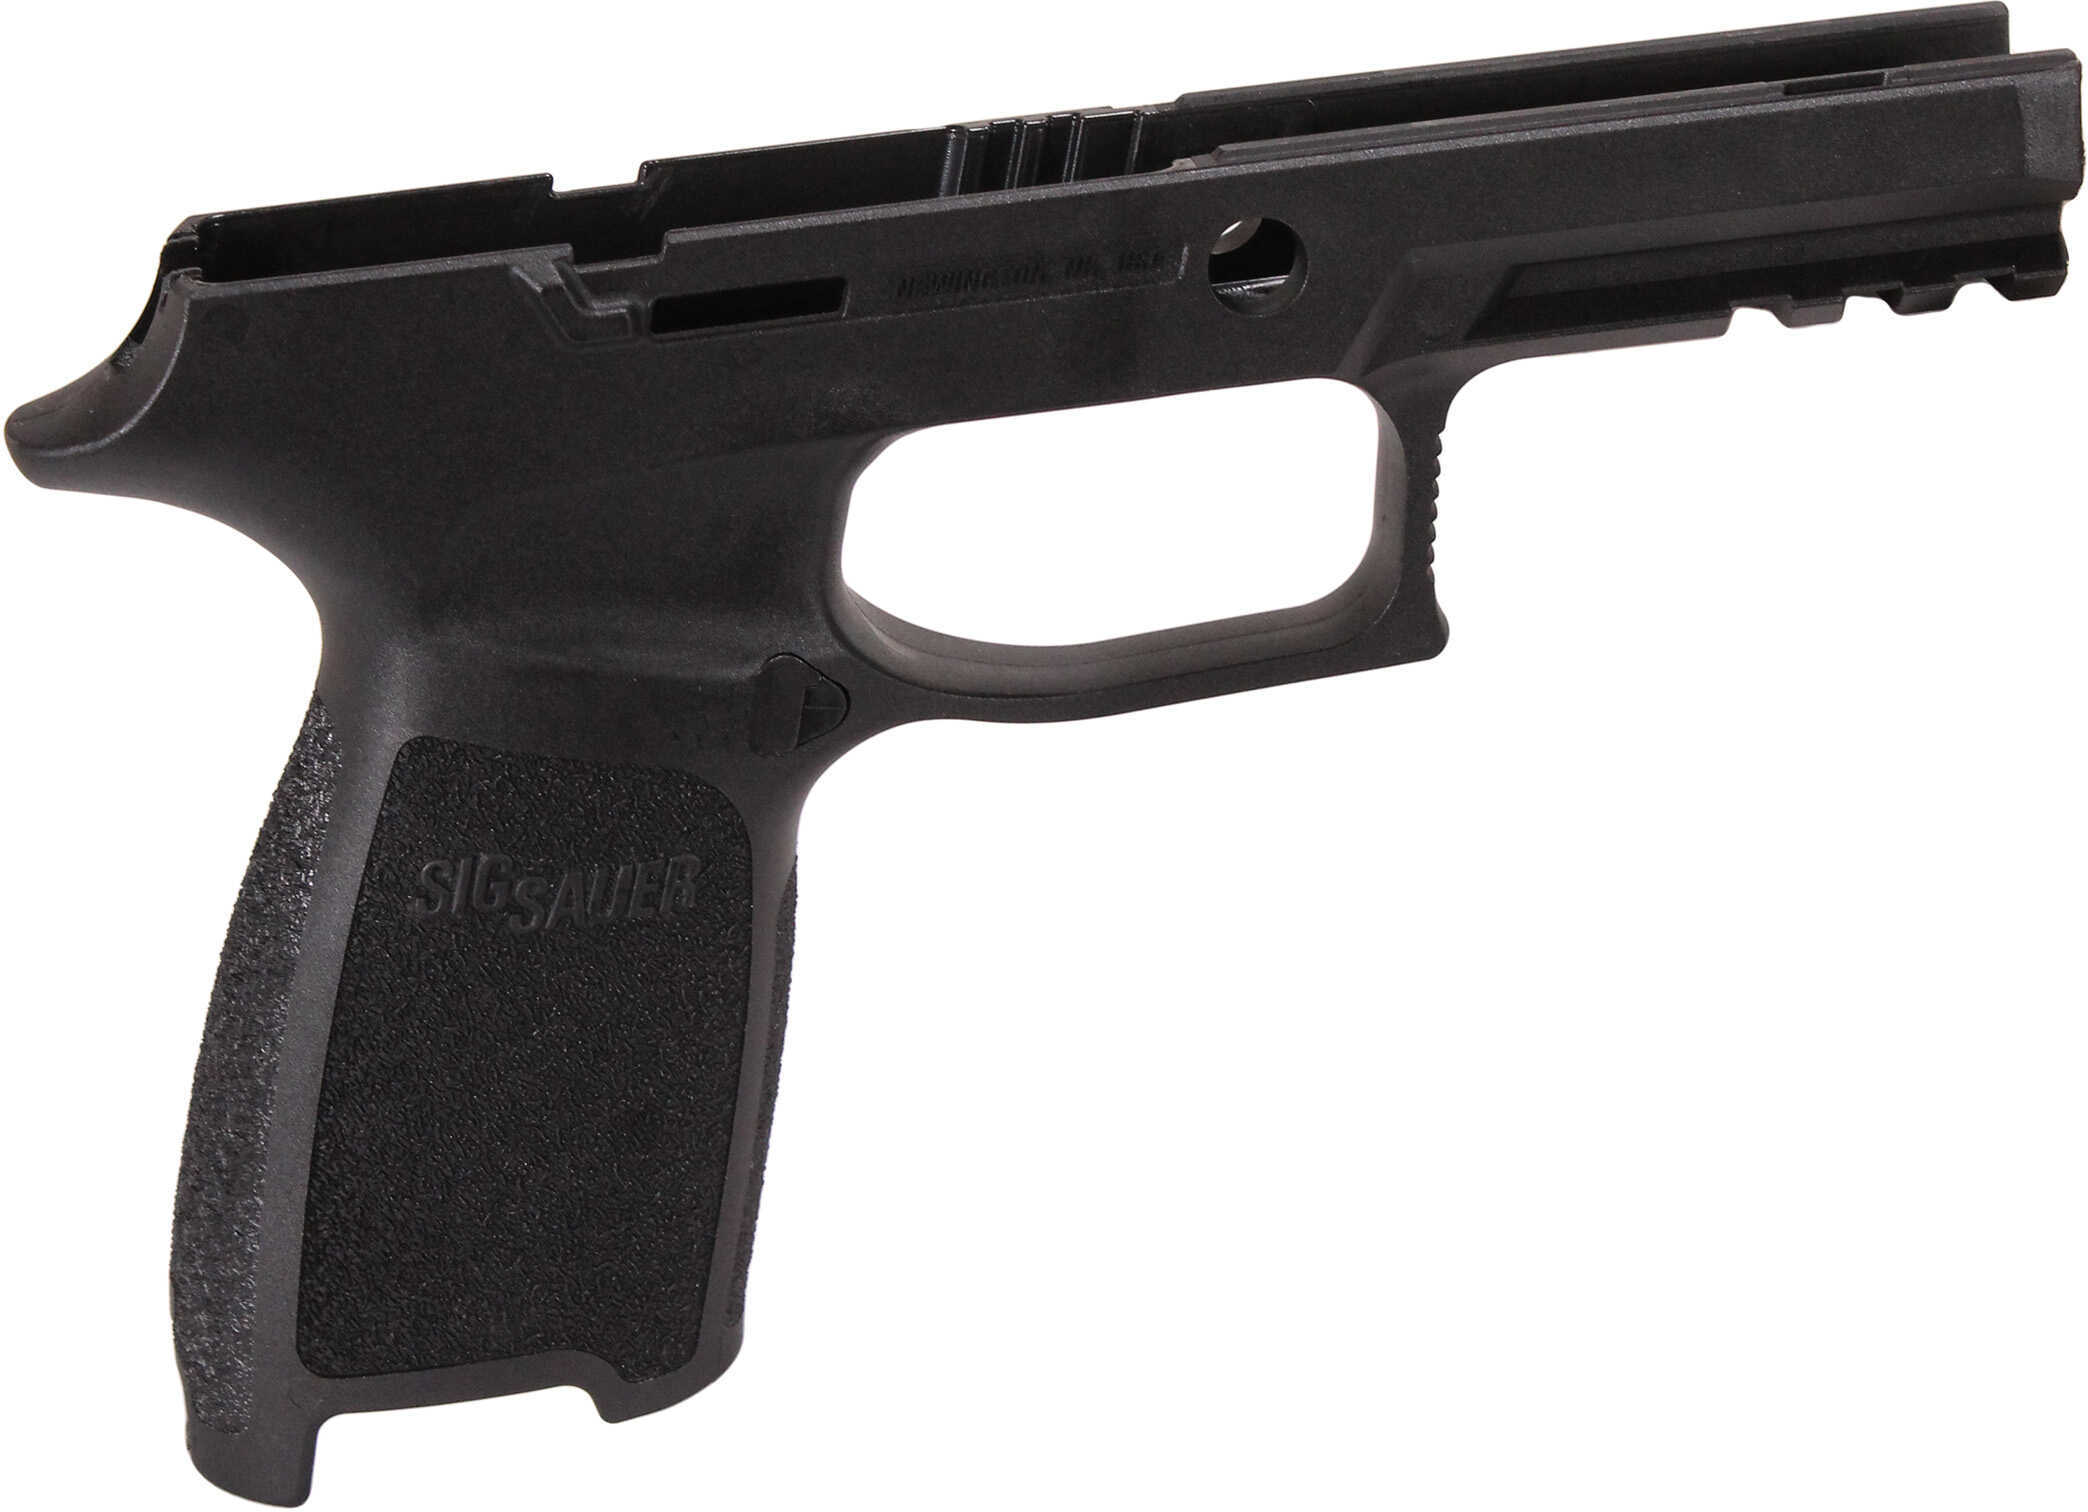 Grip Module Assembly Small P250/P320 (9mm/.40 S&W/.357 Sig), Black